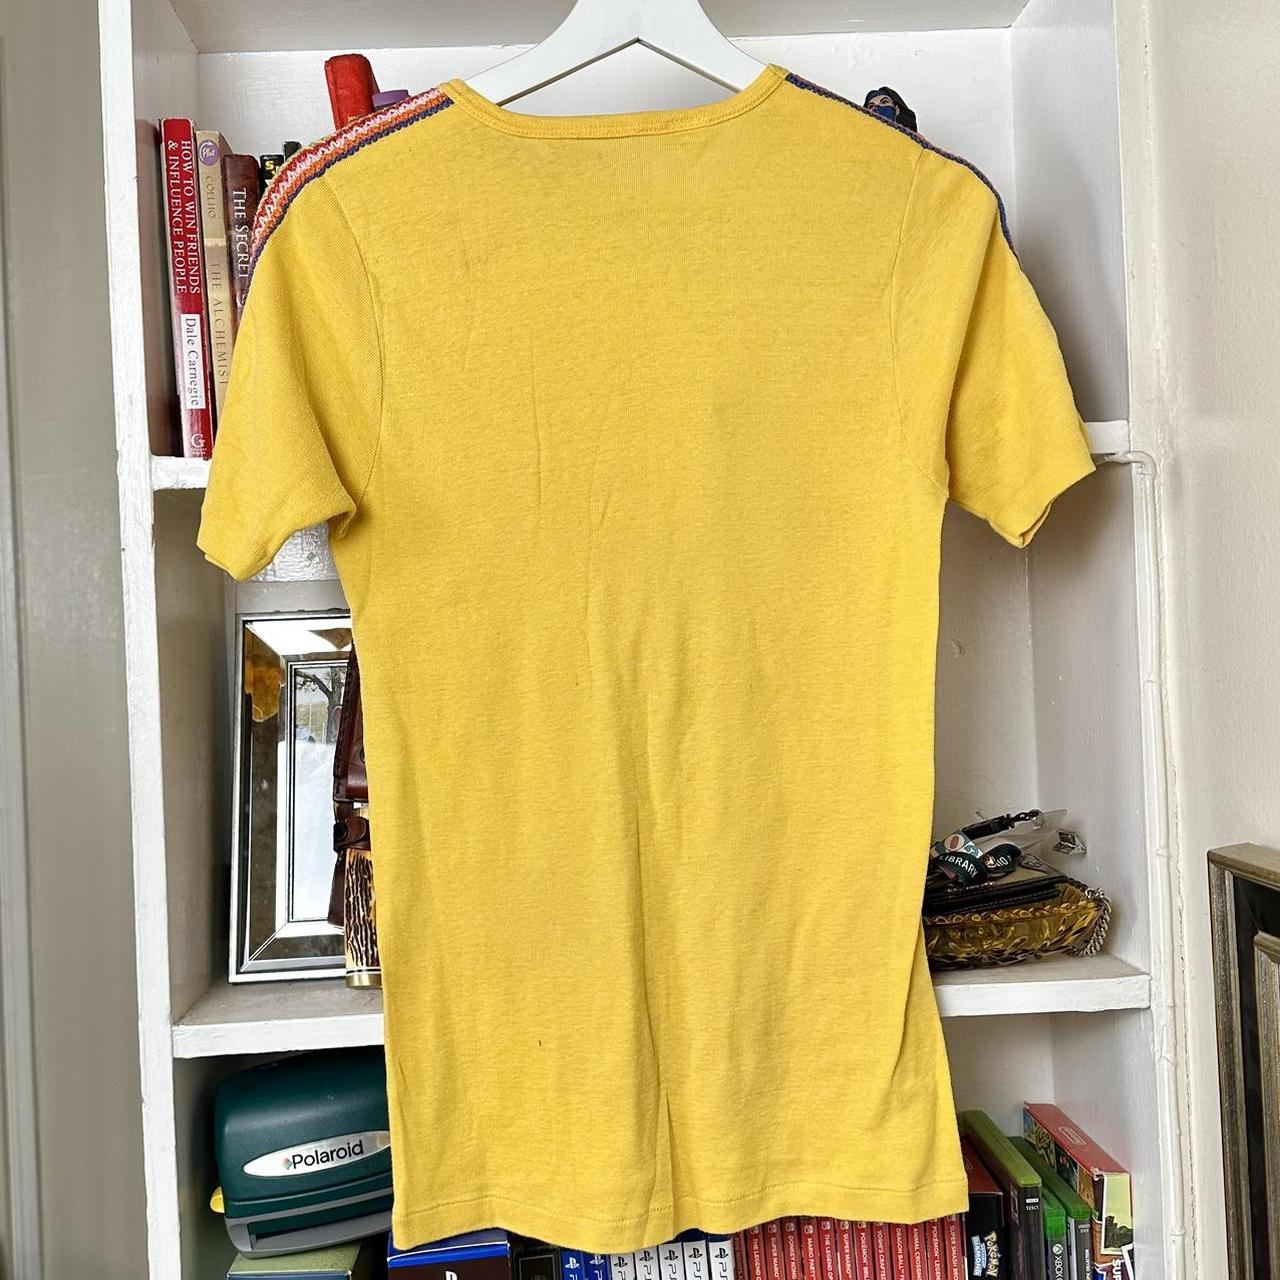 Vintage yellow 70s yellow t shirt with embroidered... - Depop